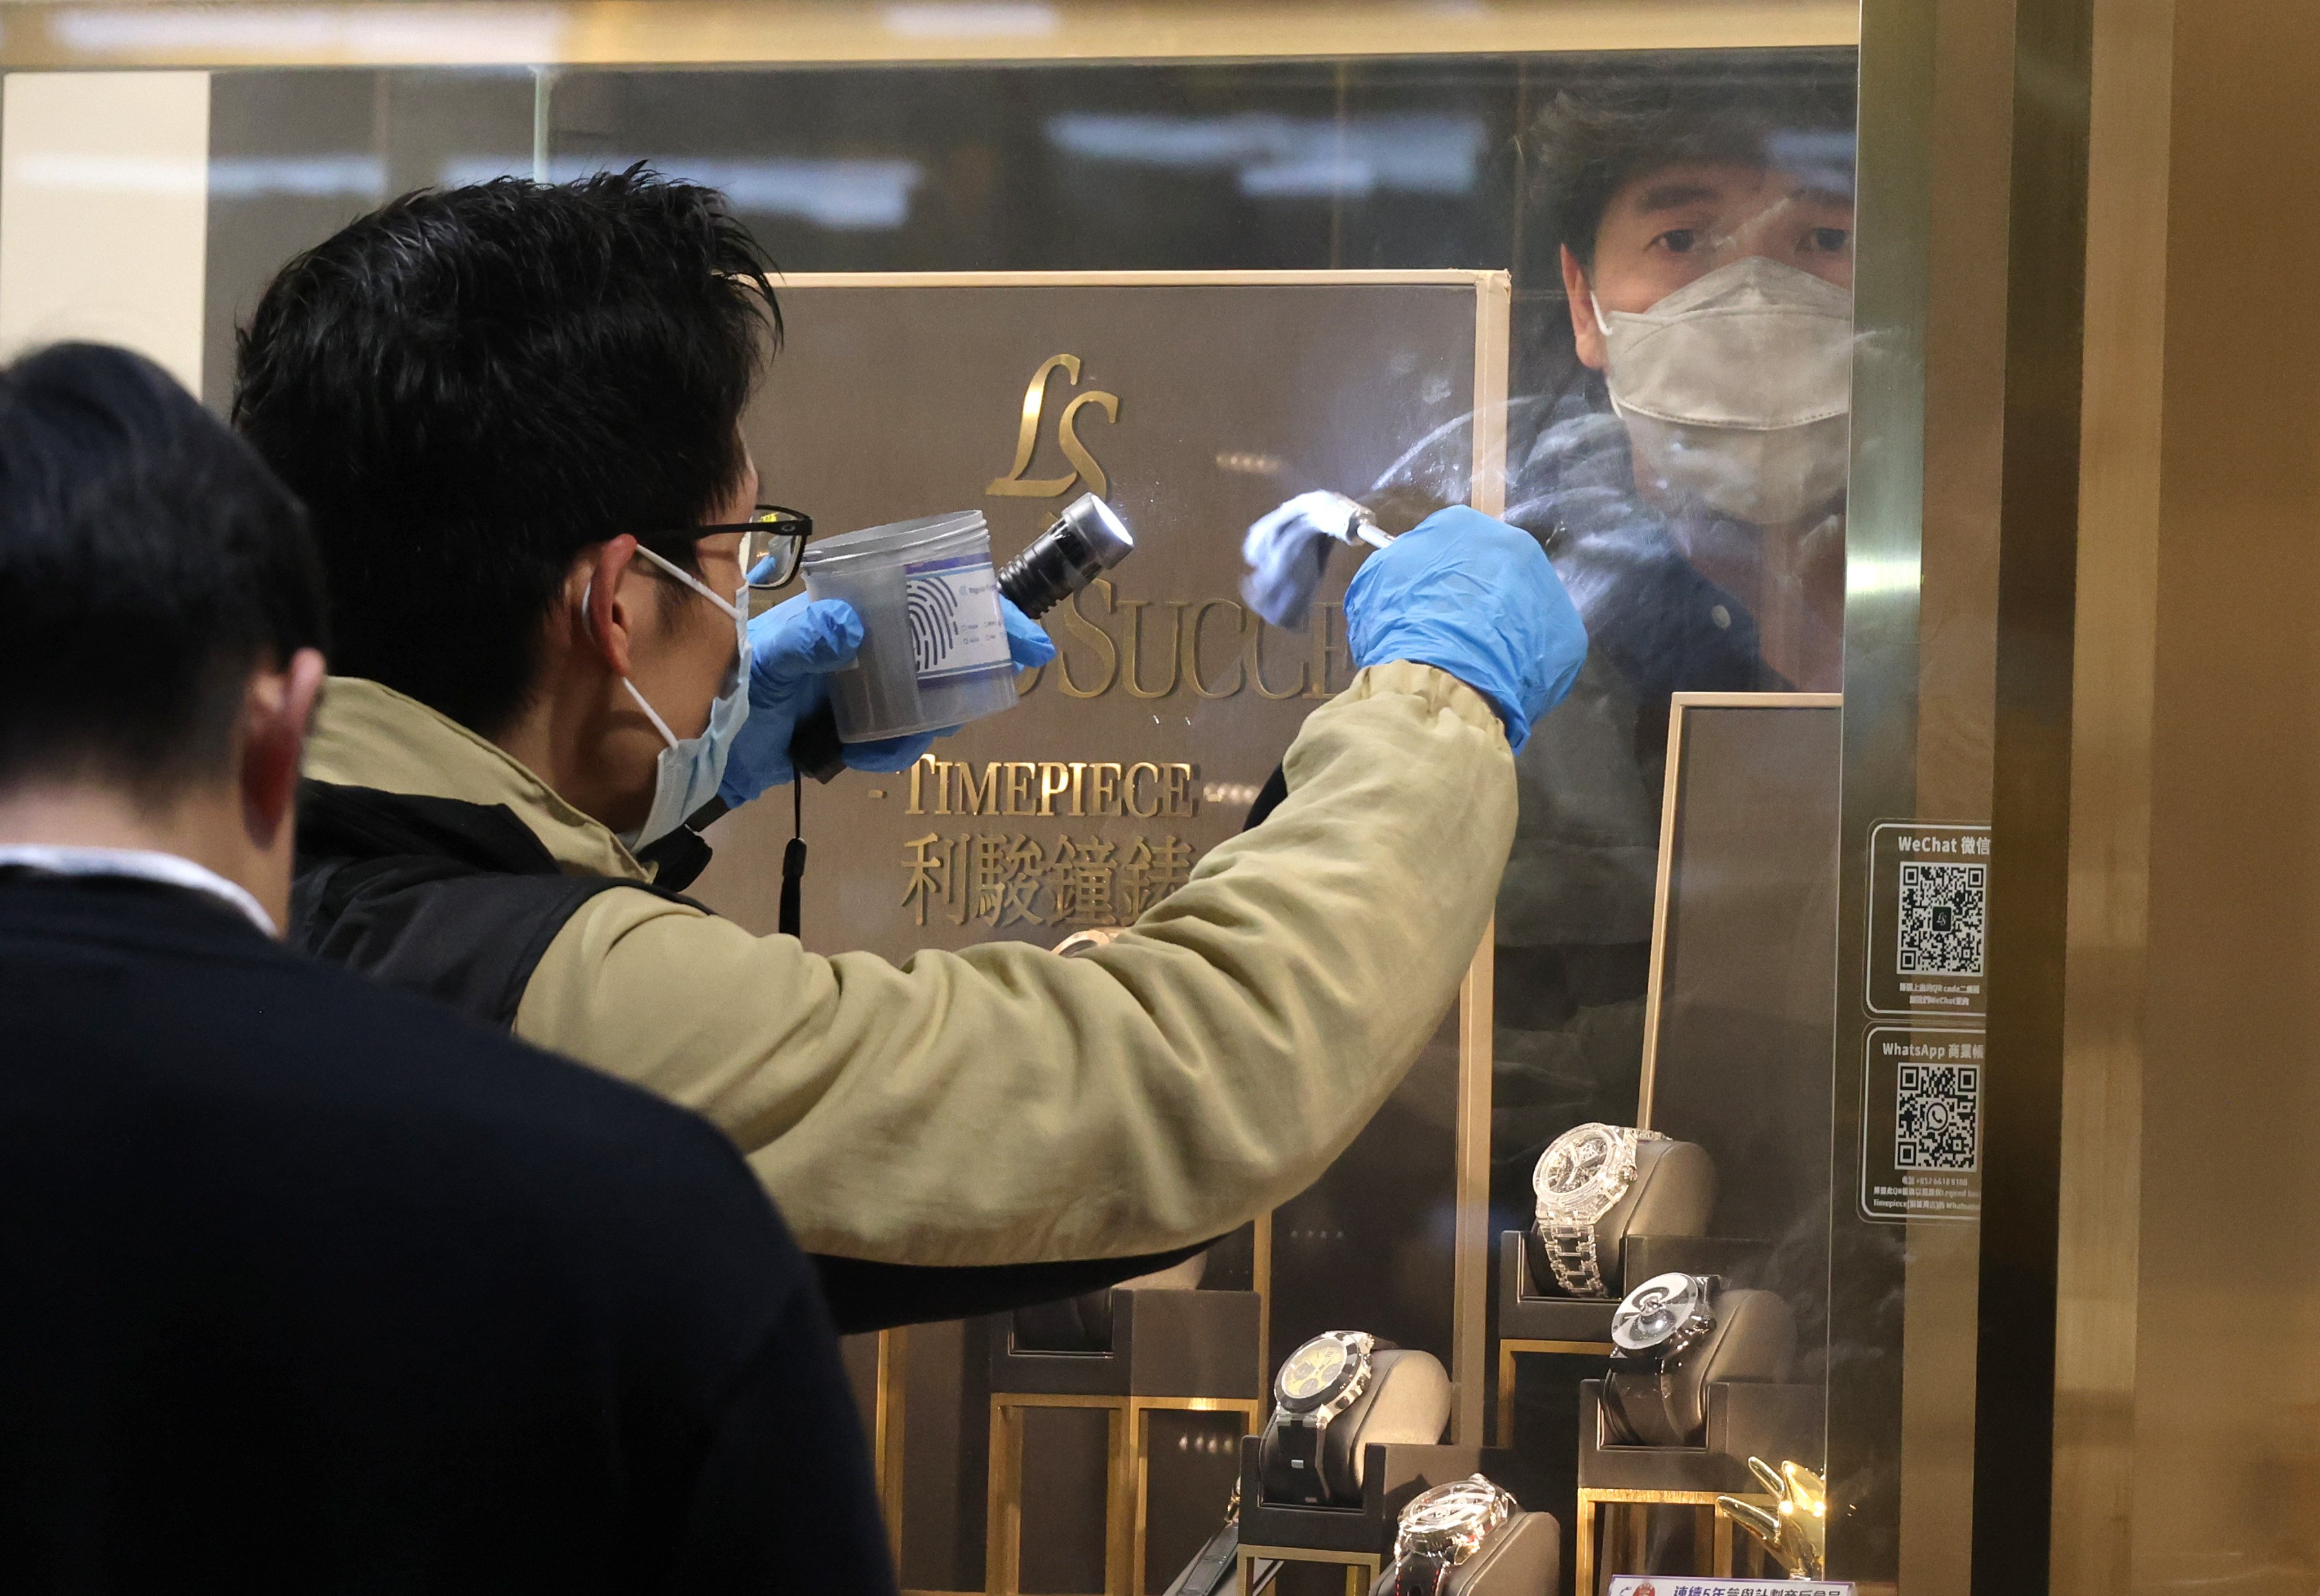 Police investigate at the Legend Success Timepiece store in Foo Ming Street, Causeway Bay on February 28, after it was robbed. Seven watch shops and goldsmiths were robbed last year, up from three in 2022. Photo: Jelly Tse